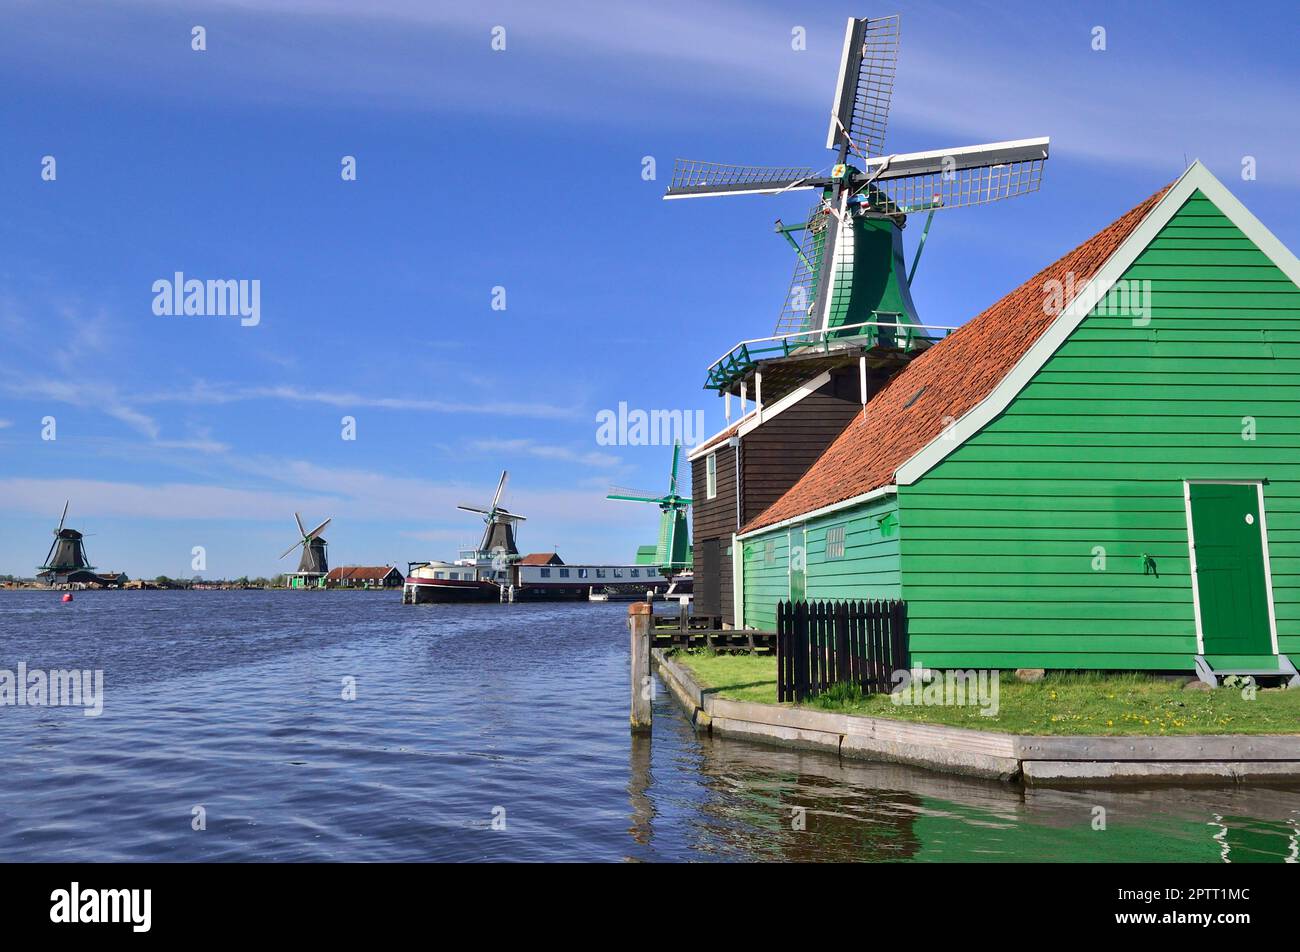 The Zaanse Schans houses seven museums — the Weavers House, the Cooperage, the Jisper House, Zaan Time Museum, Albert Heijn Museum Shop and the Bakery Stock Photo